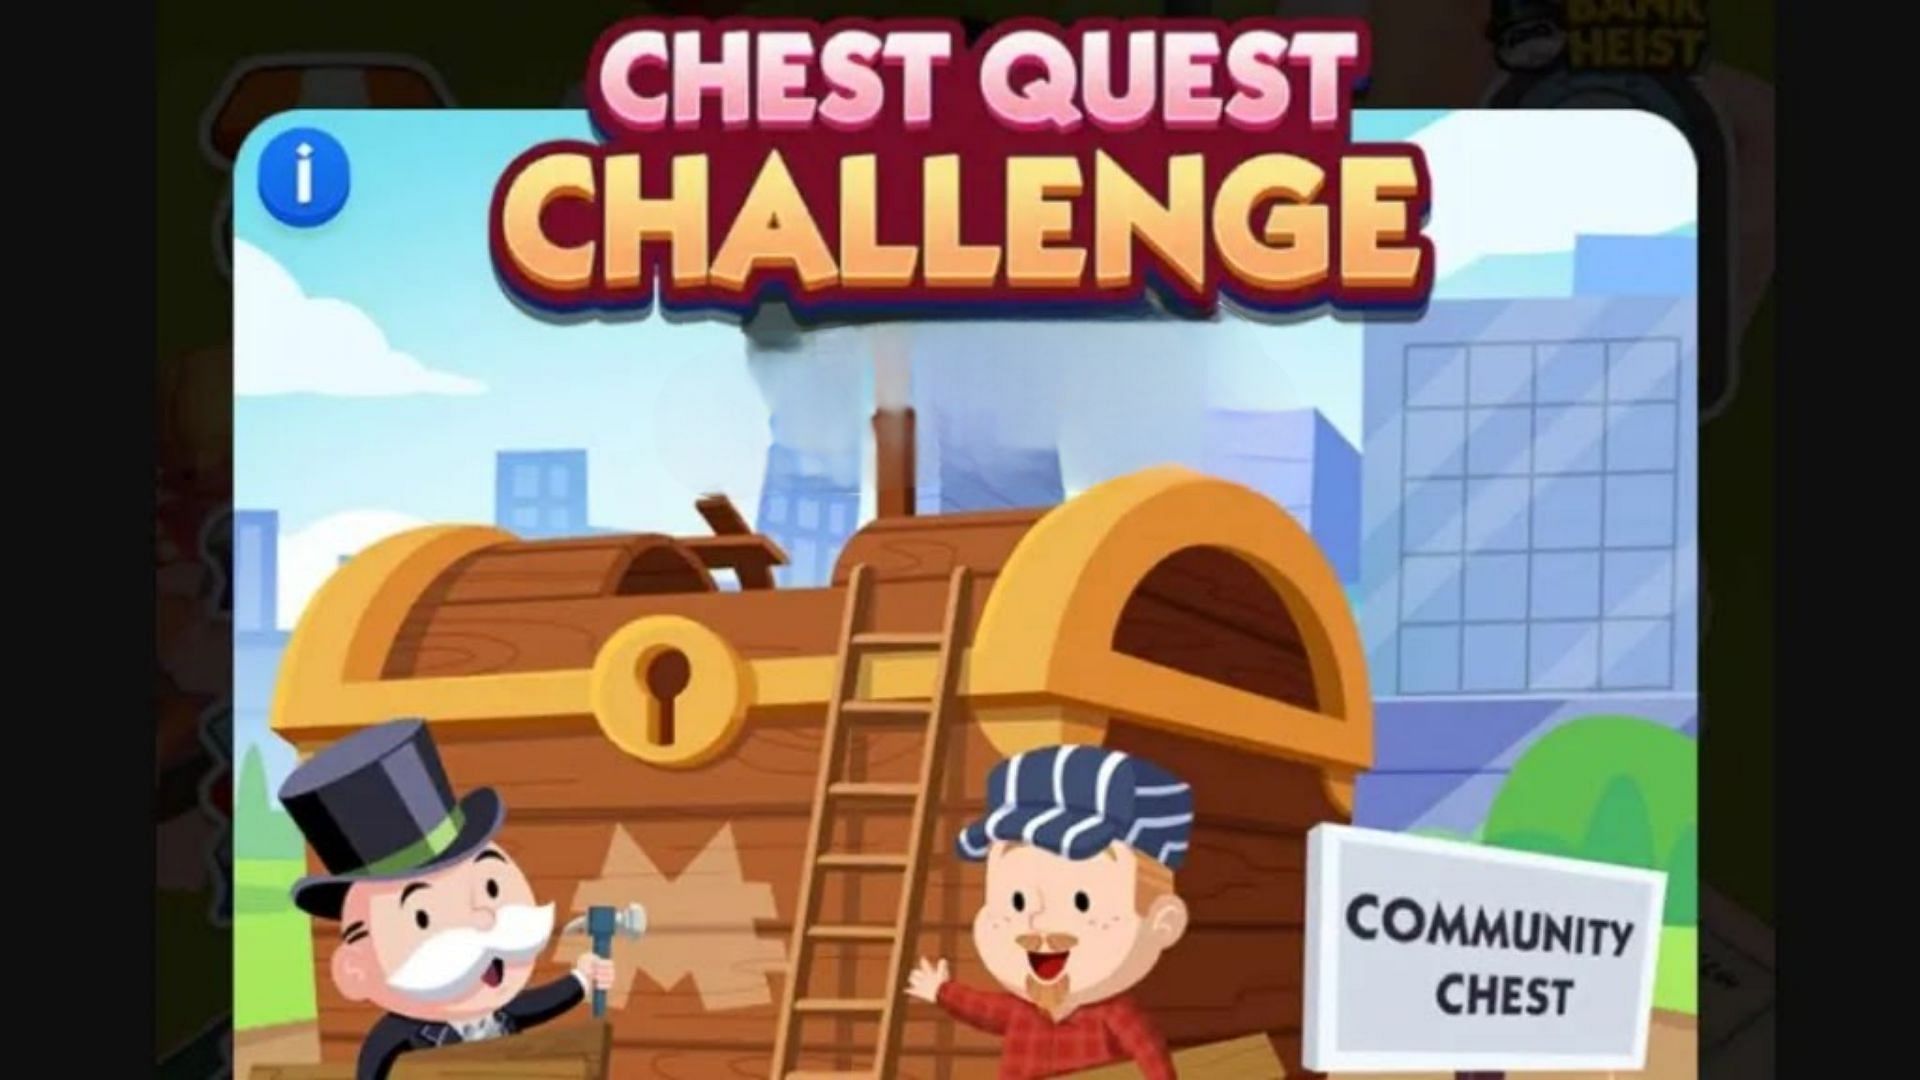 Monopoly Go Quest Challenge is now live in the game (Image via Scopely) 